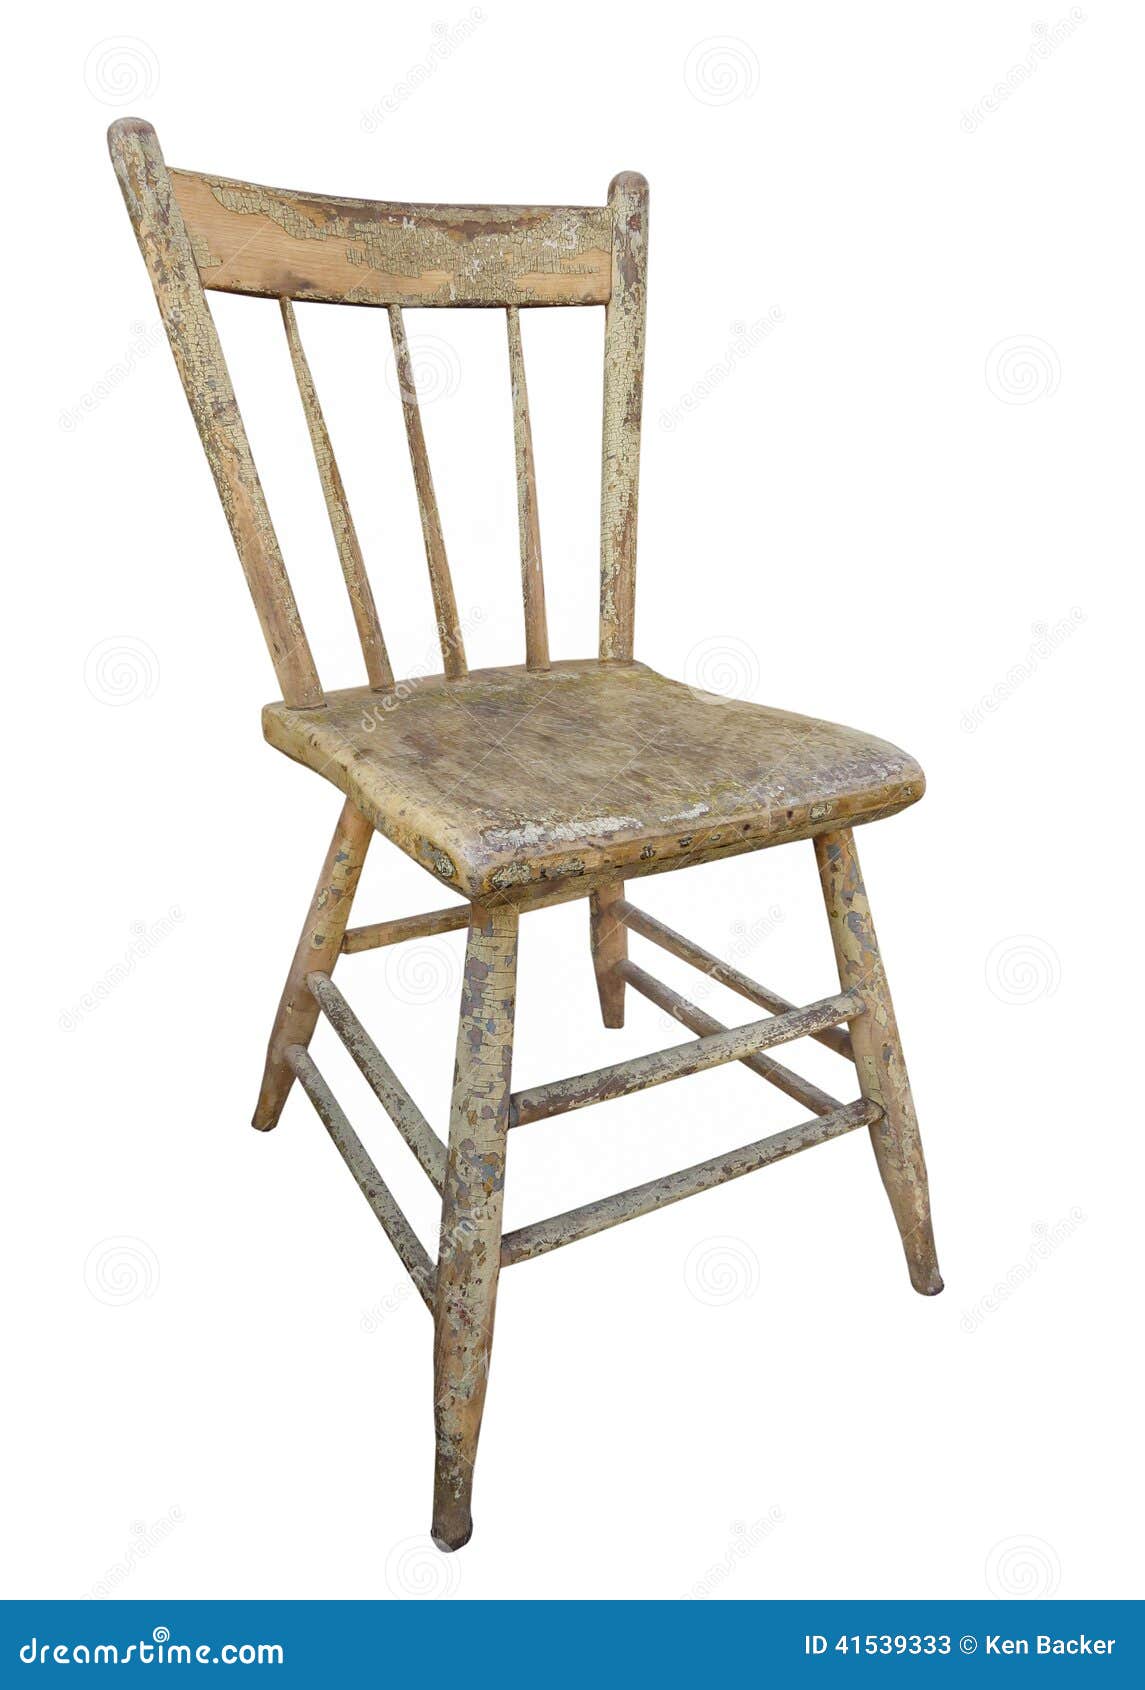 Old Wooden Kitchen Chair Isolated. Stock Image - Image ...